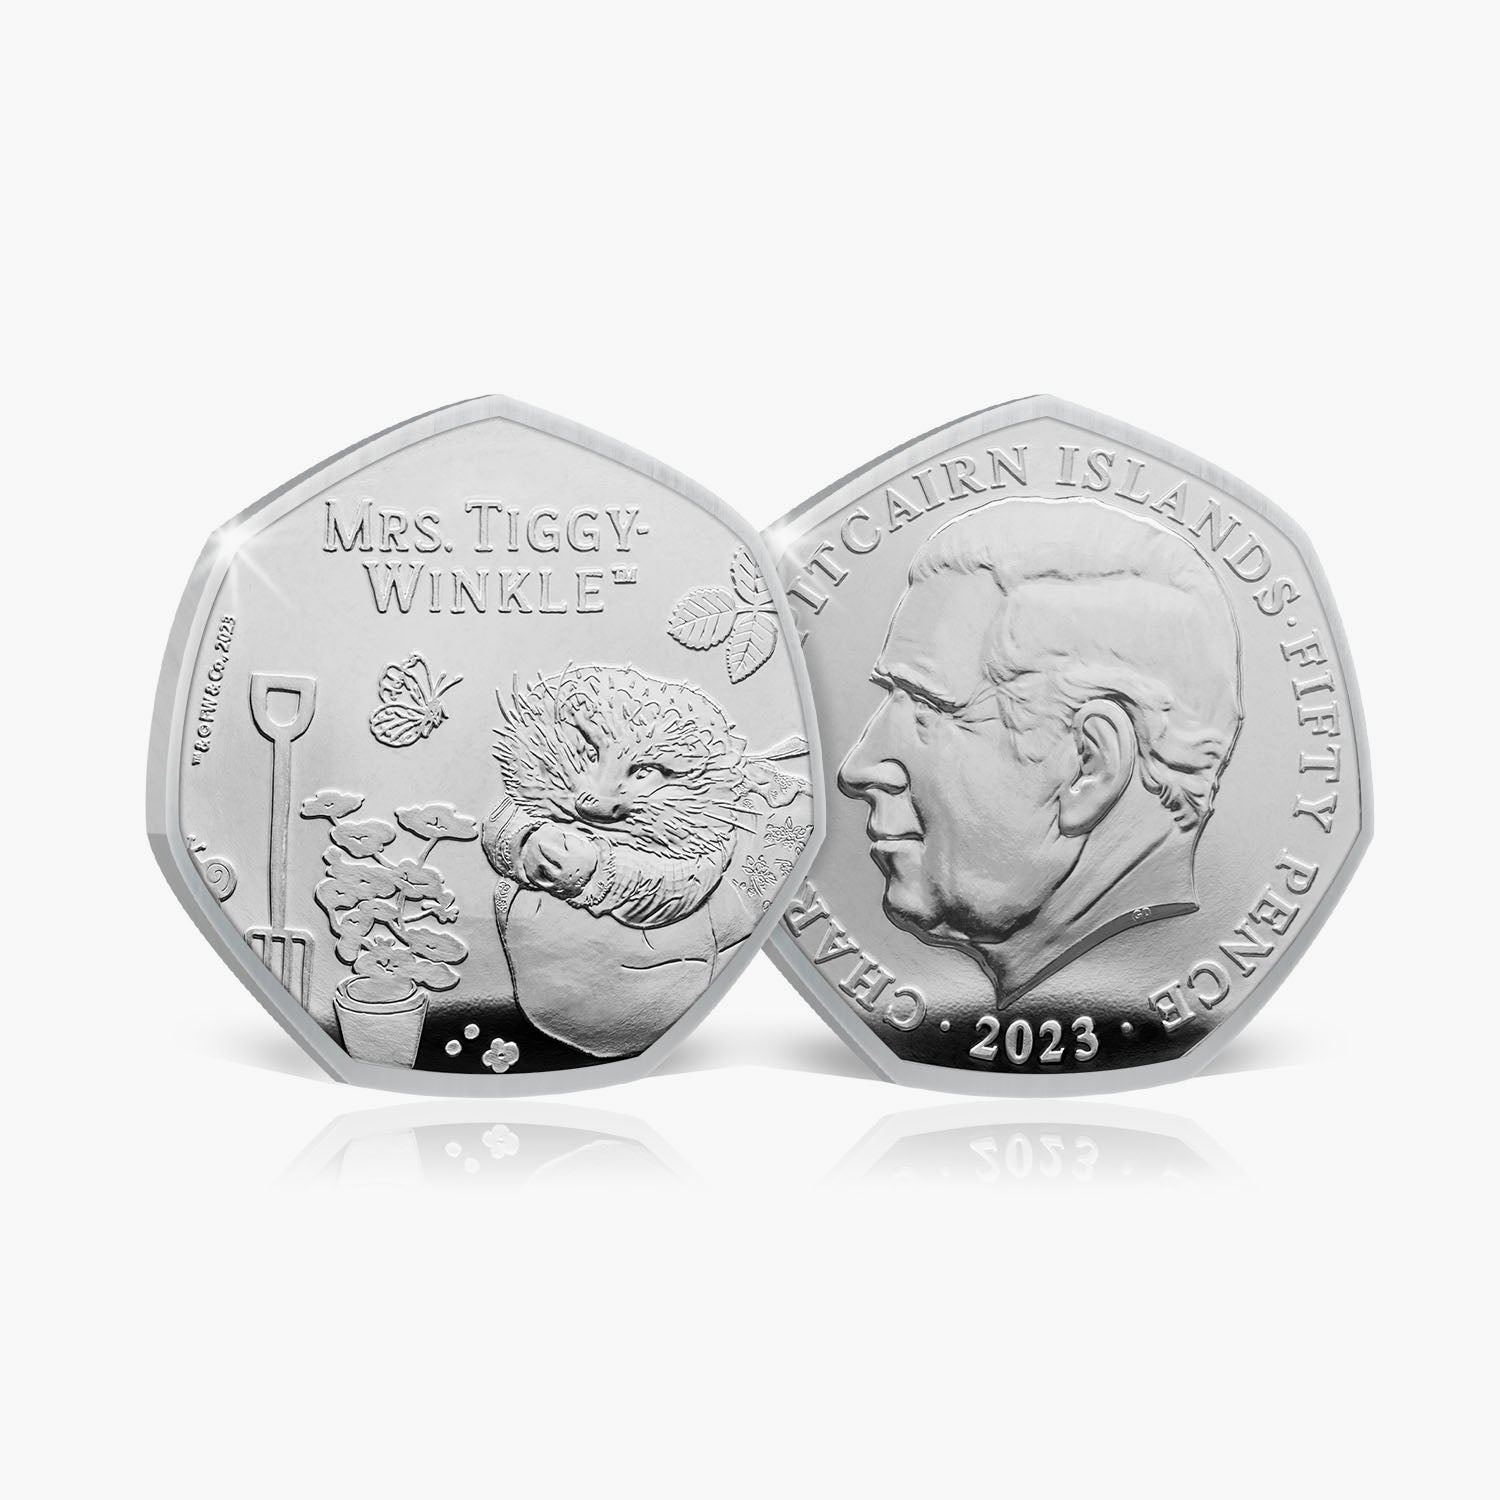 Complete the Set - The World of Peter Rabbit 2023 Coin Collection